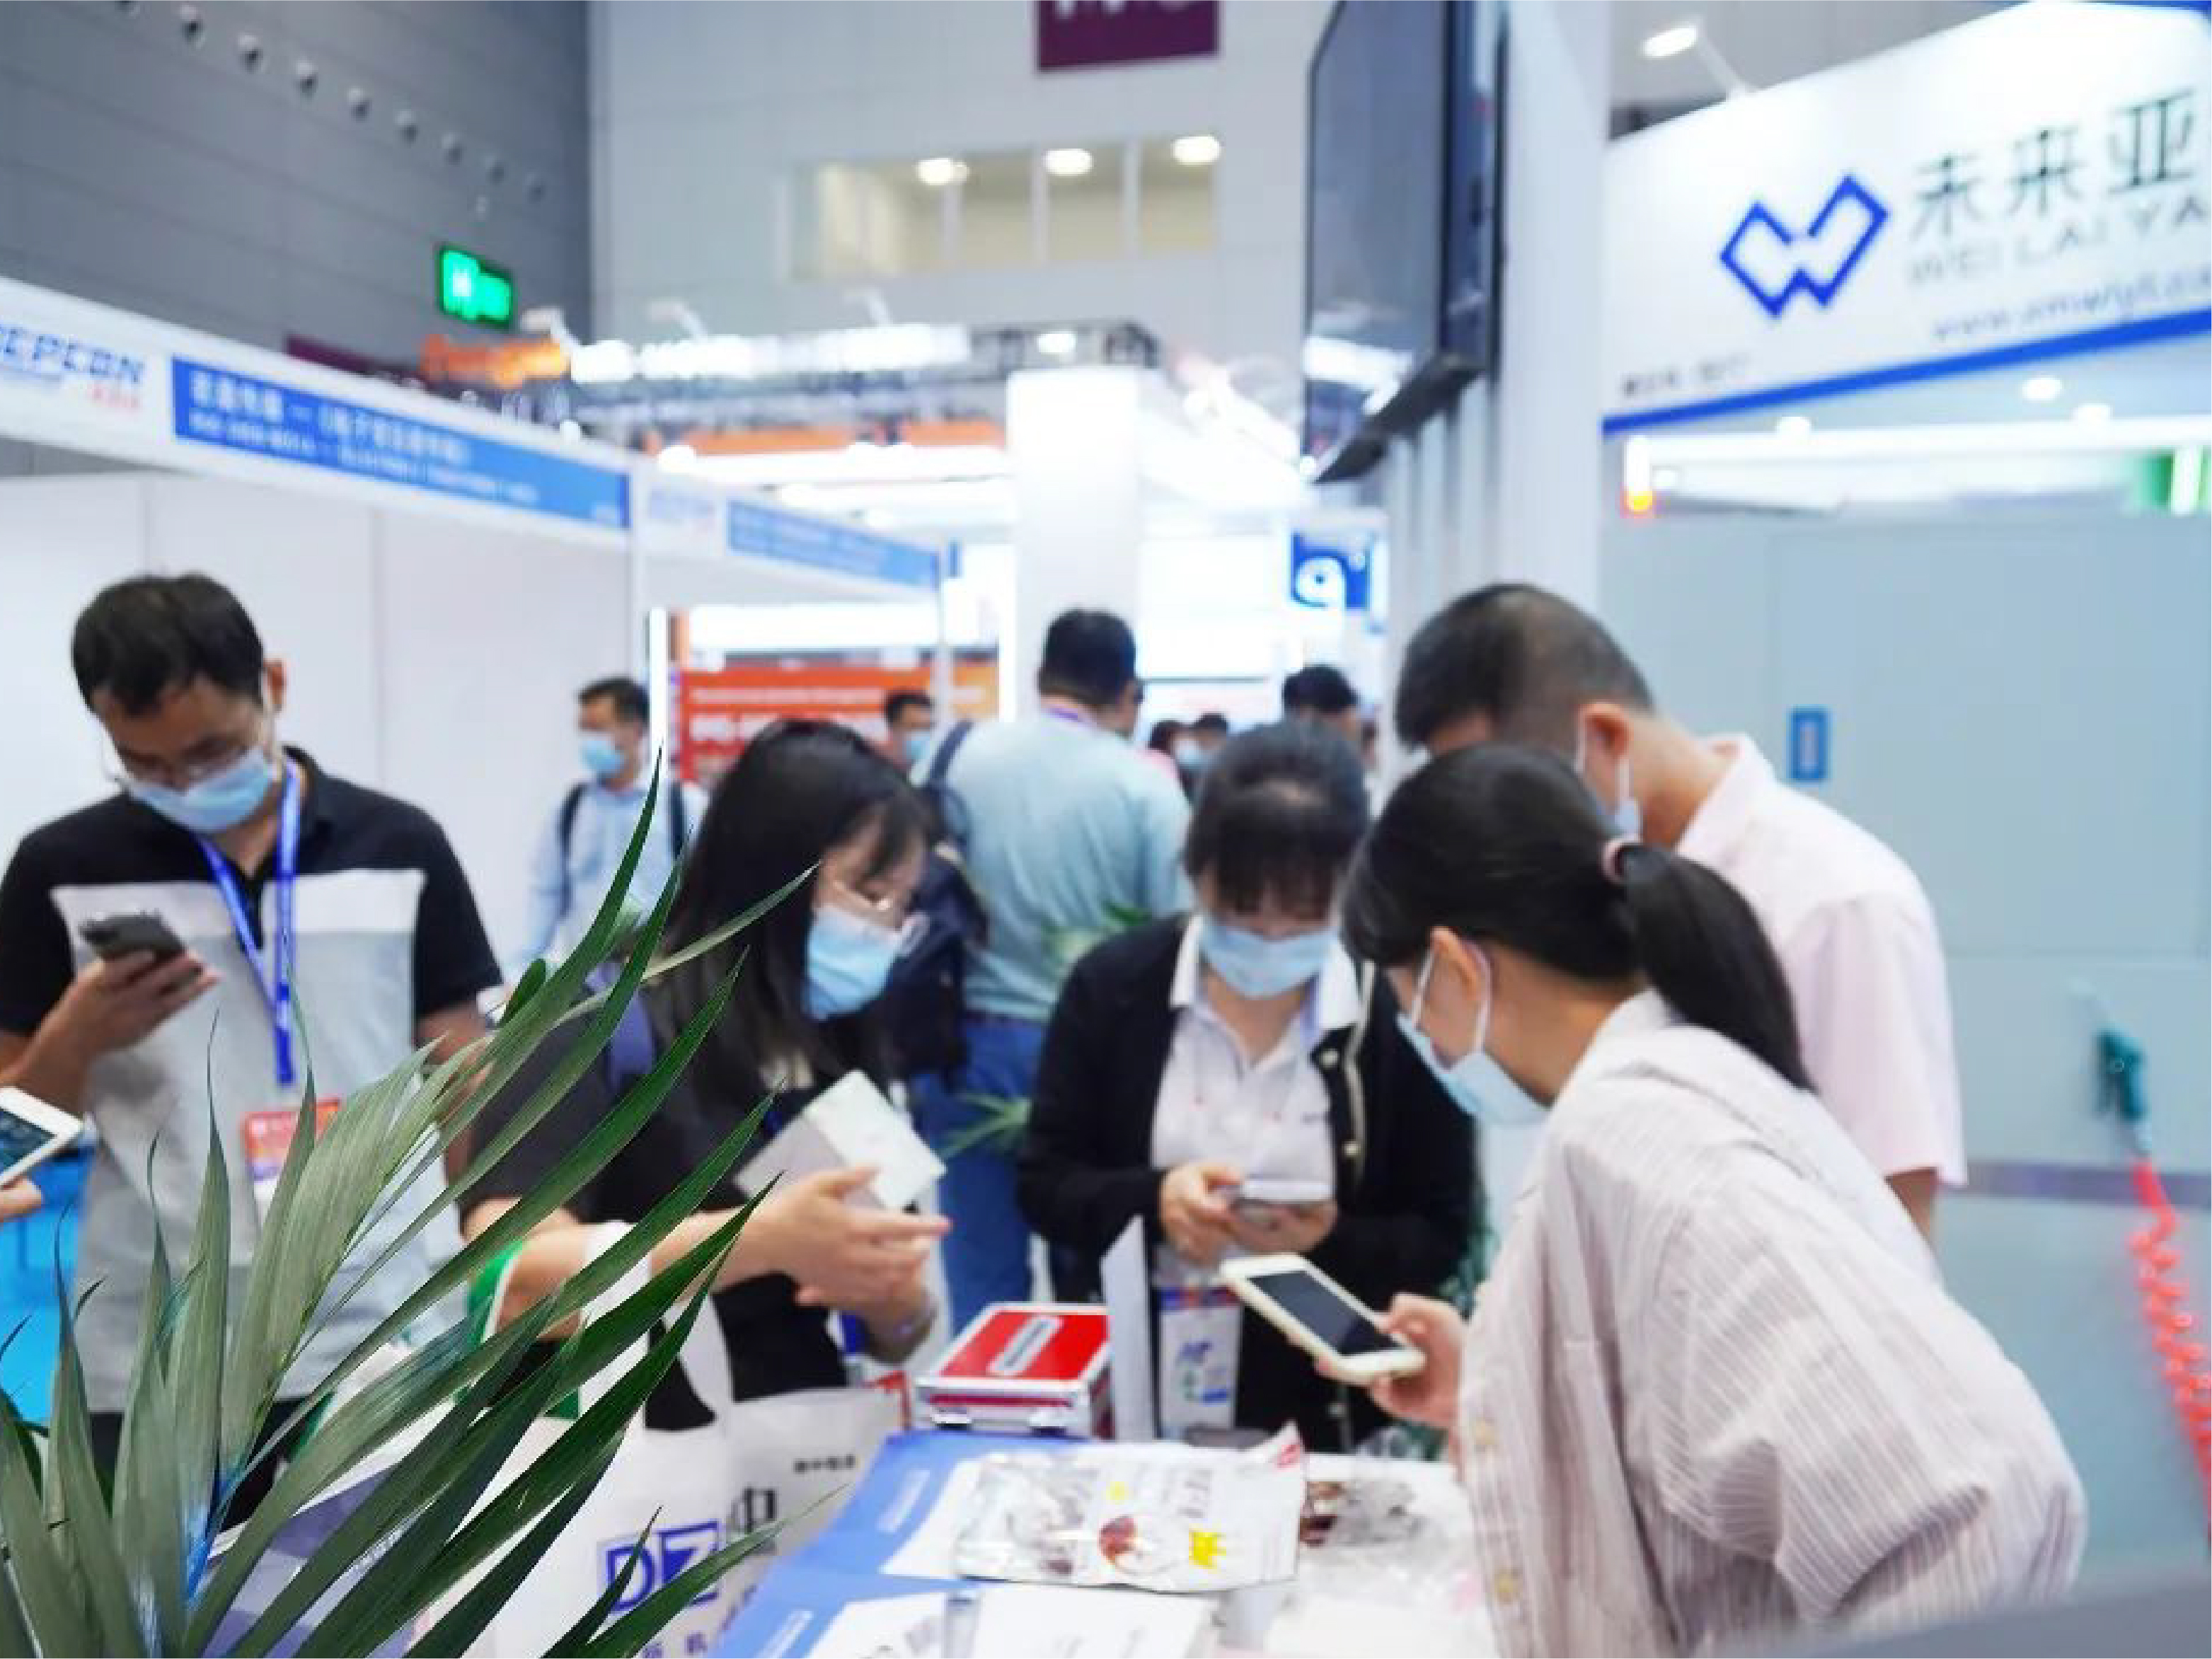 Asia Electronics Show 2021 came to a successful end